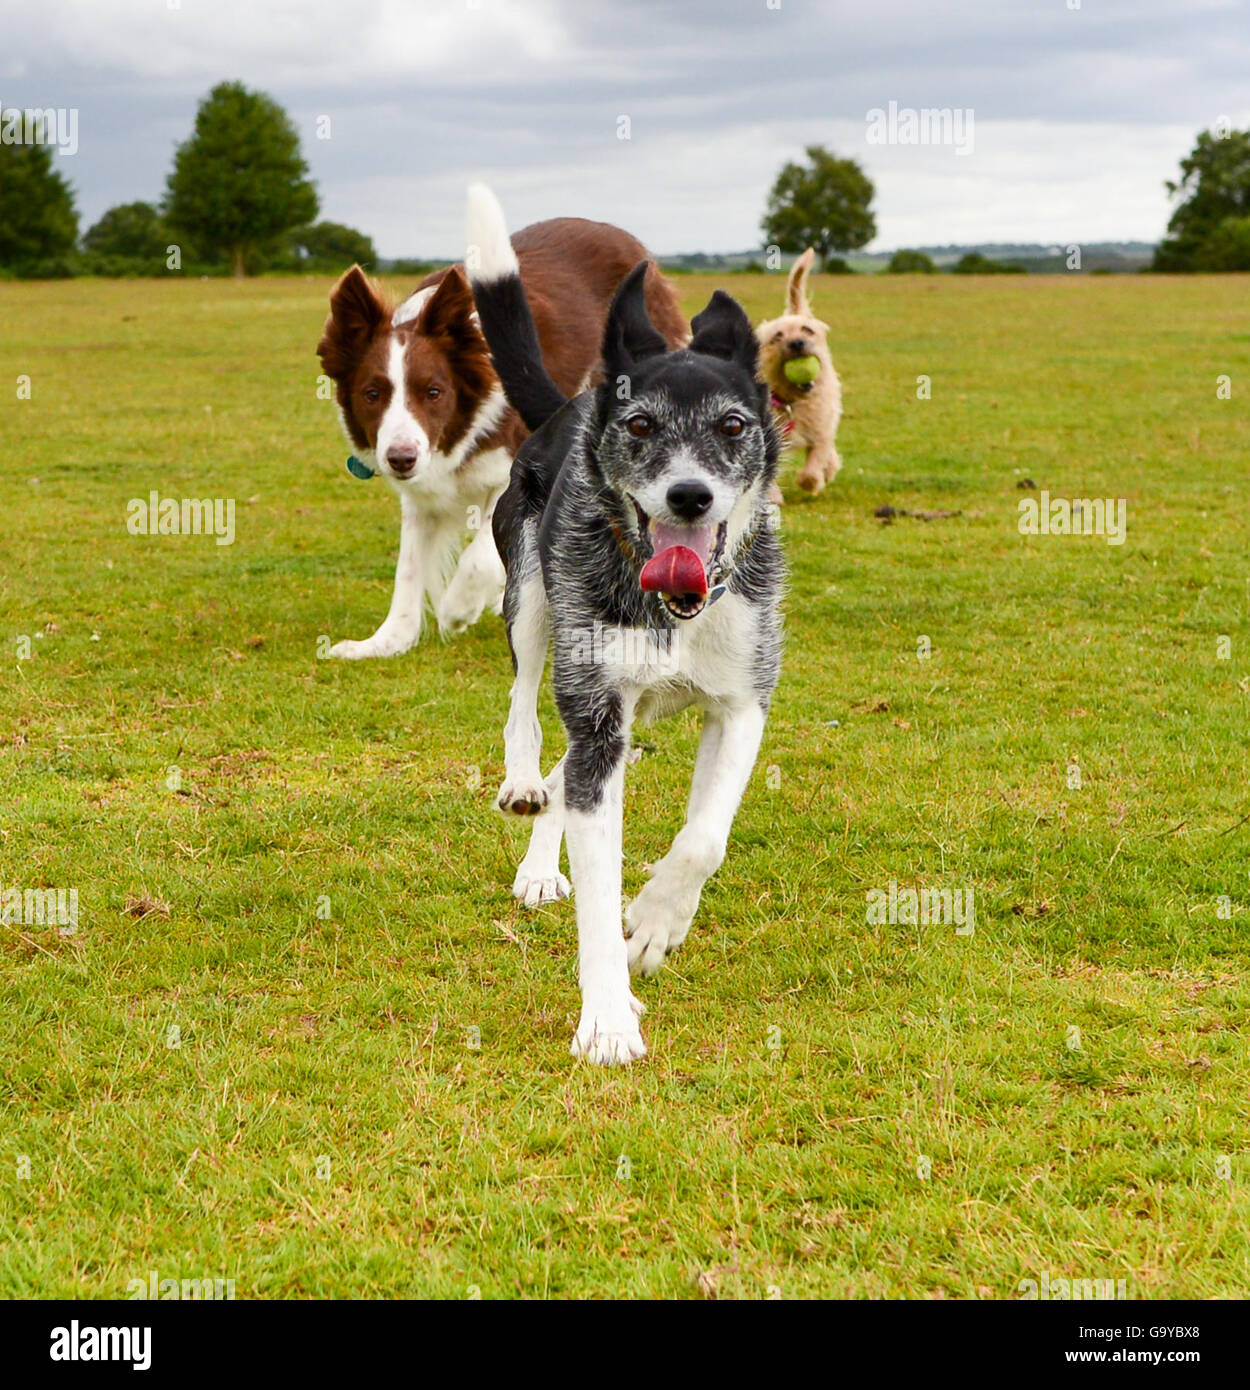 Three dogs running towards. The one at the front is carrying a ball in its mouth. Stock Photo